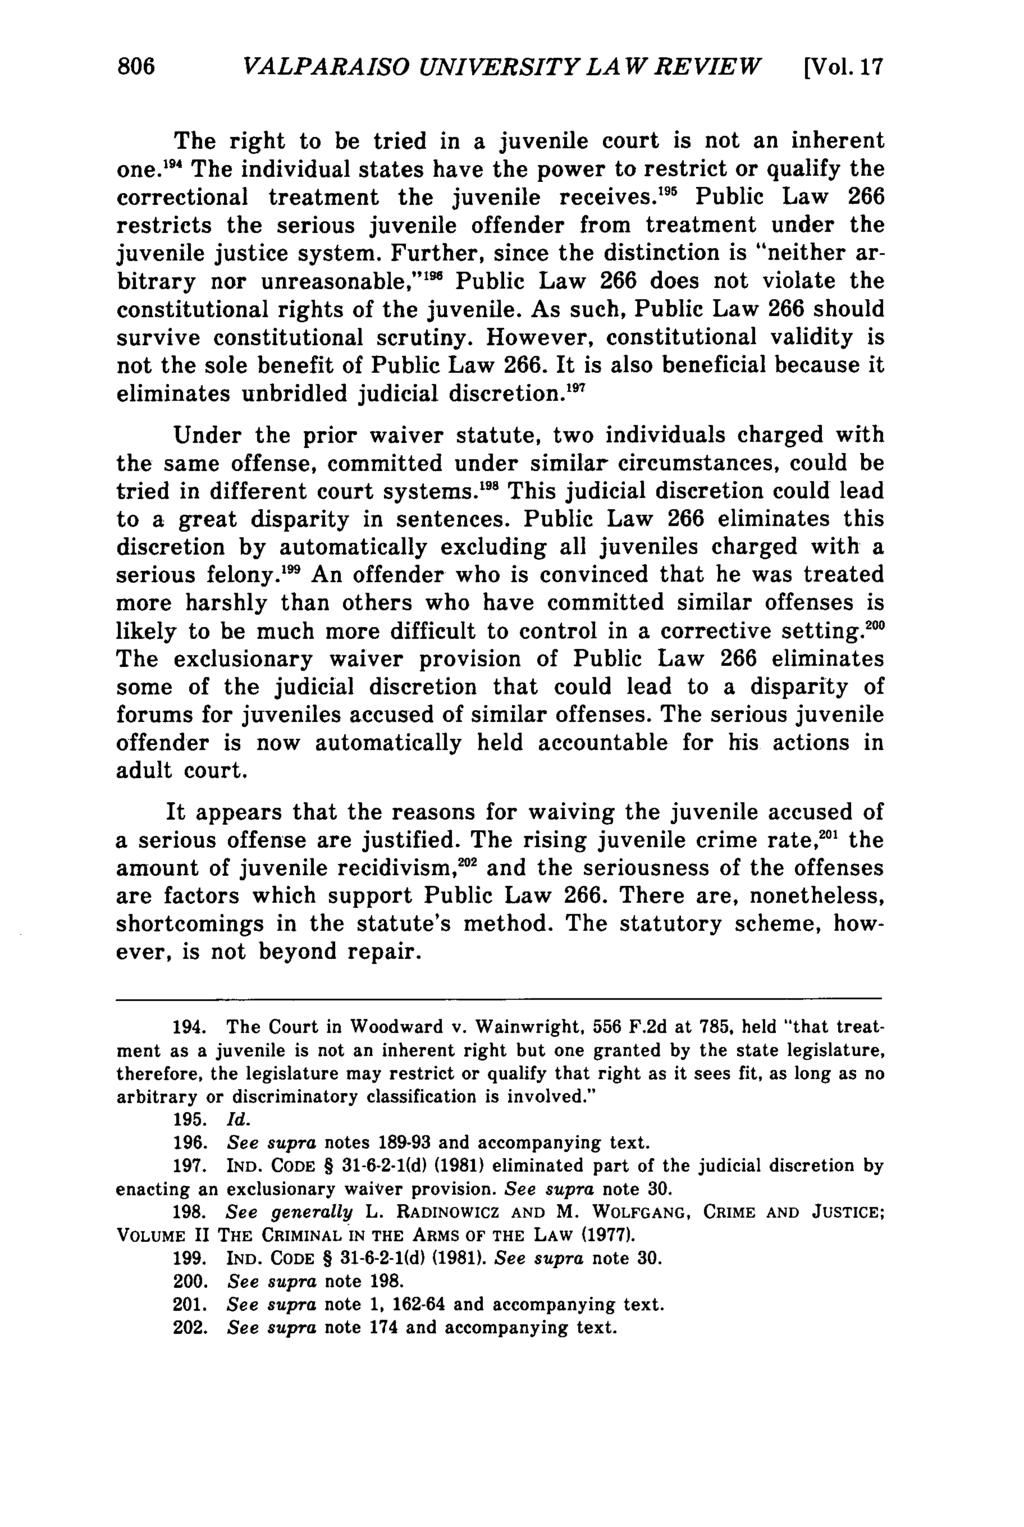 806 Valparaiso VALPARAISO University Law UNIVERSITY Review, Vol. 17, LAW No. REVIEW 4 [1983], Art. 9[Vol.17 The right to be tried in a juvenile court is not an inherent one.